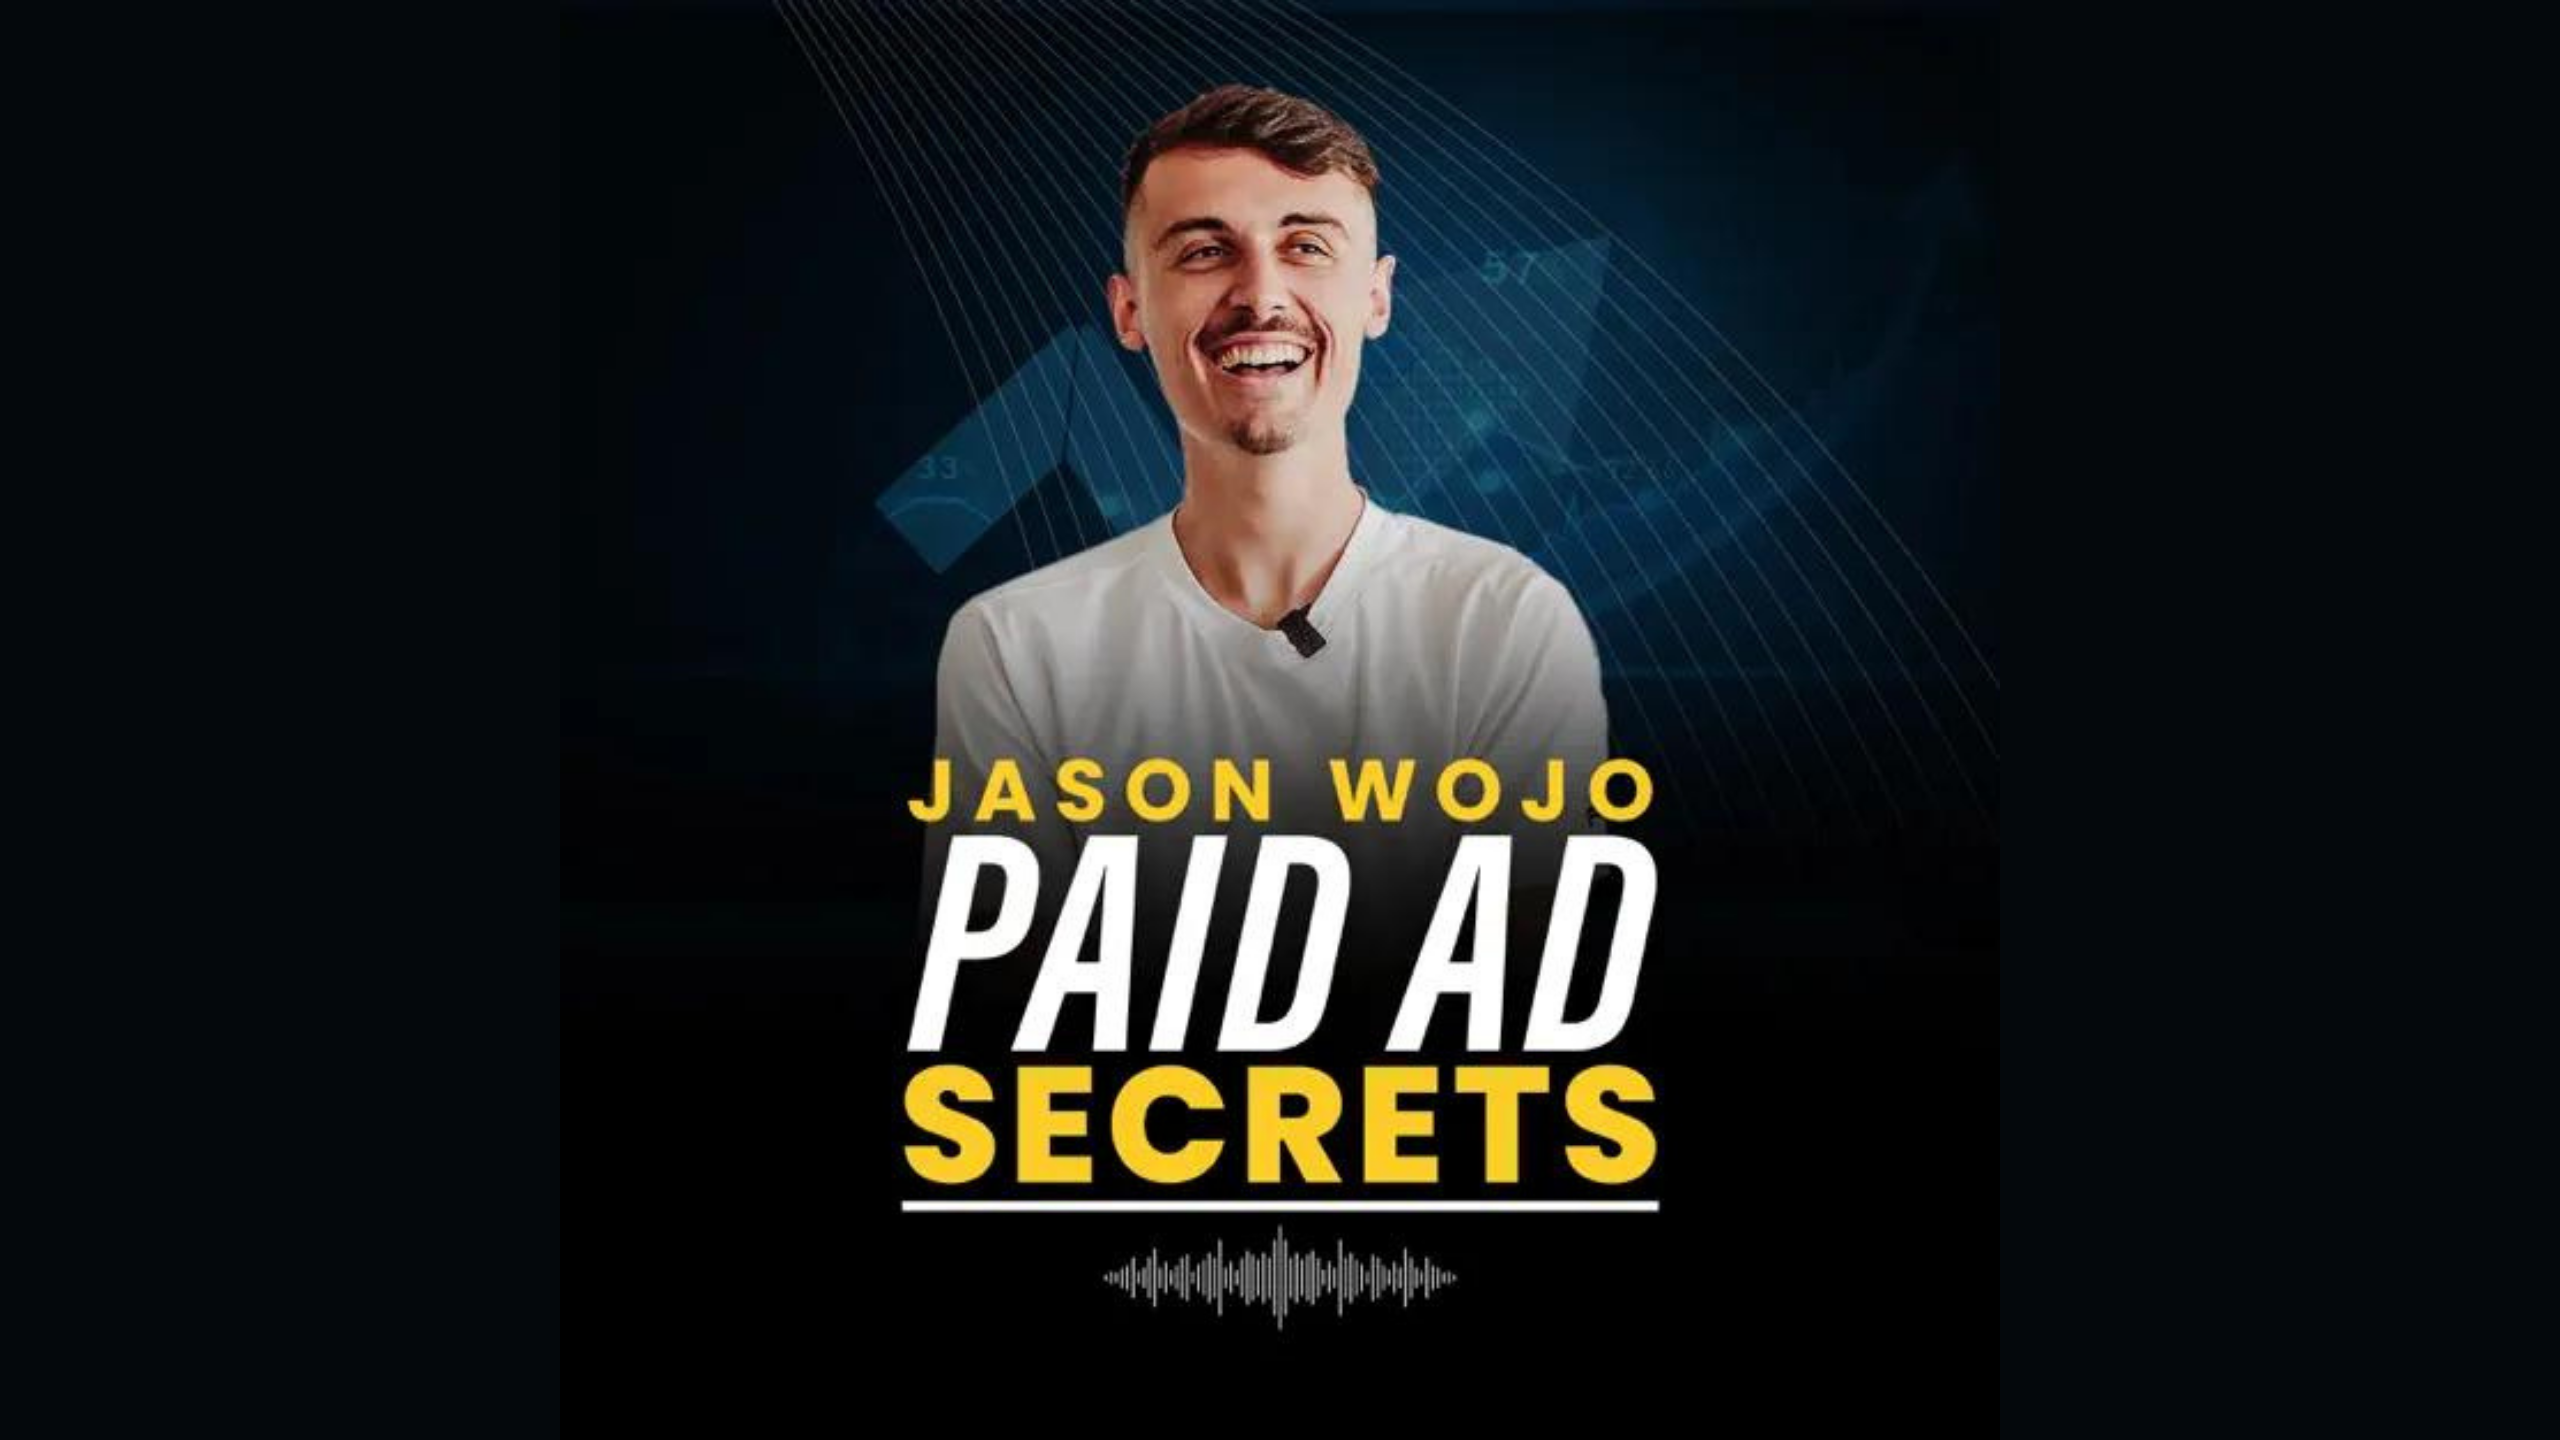 Cover image for a podcast titled "Jason Wojo Paid Ad Secrets." It features a smiling man in a white shirt against a dark background with faint curved lines. The text is in bold yellow and white, with a small sound wave graphic below the title.